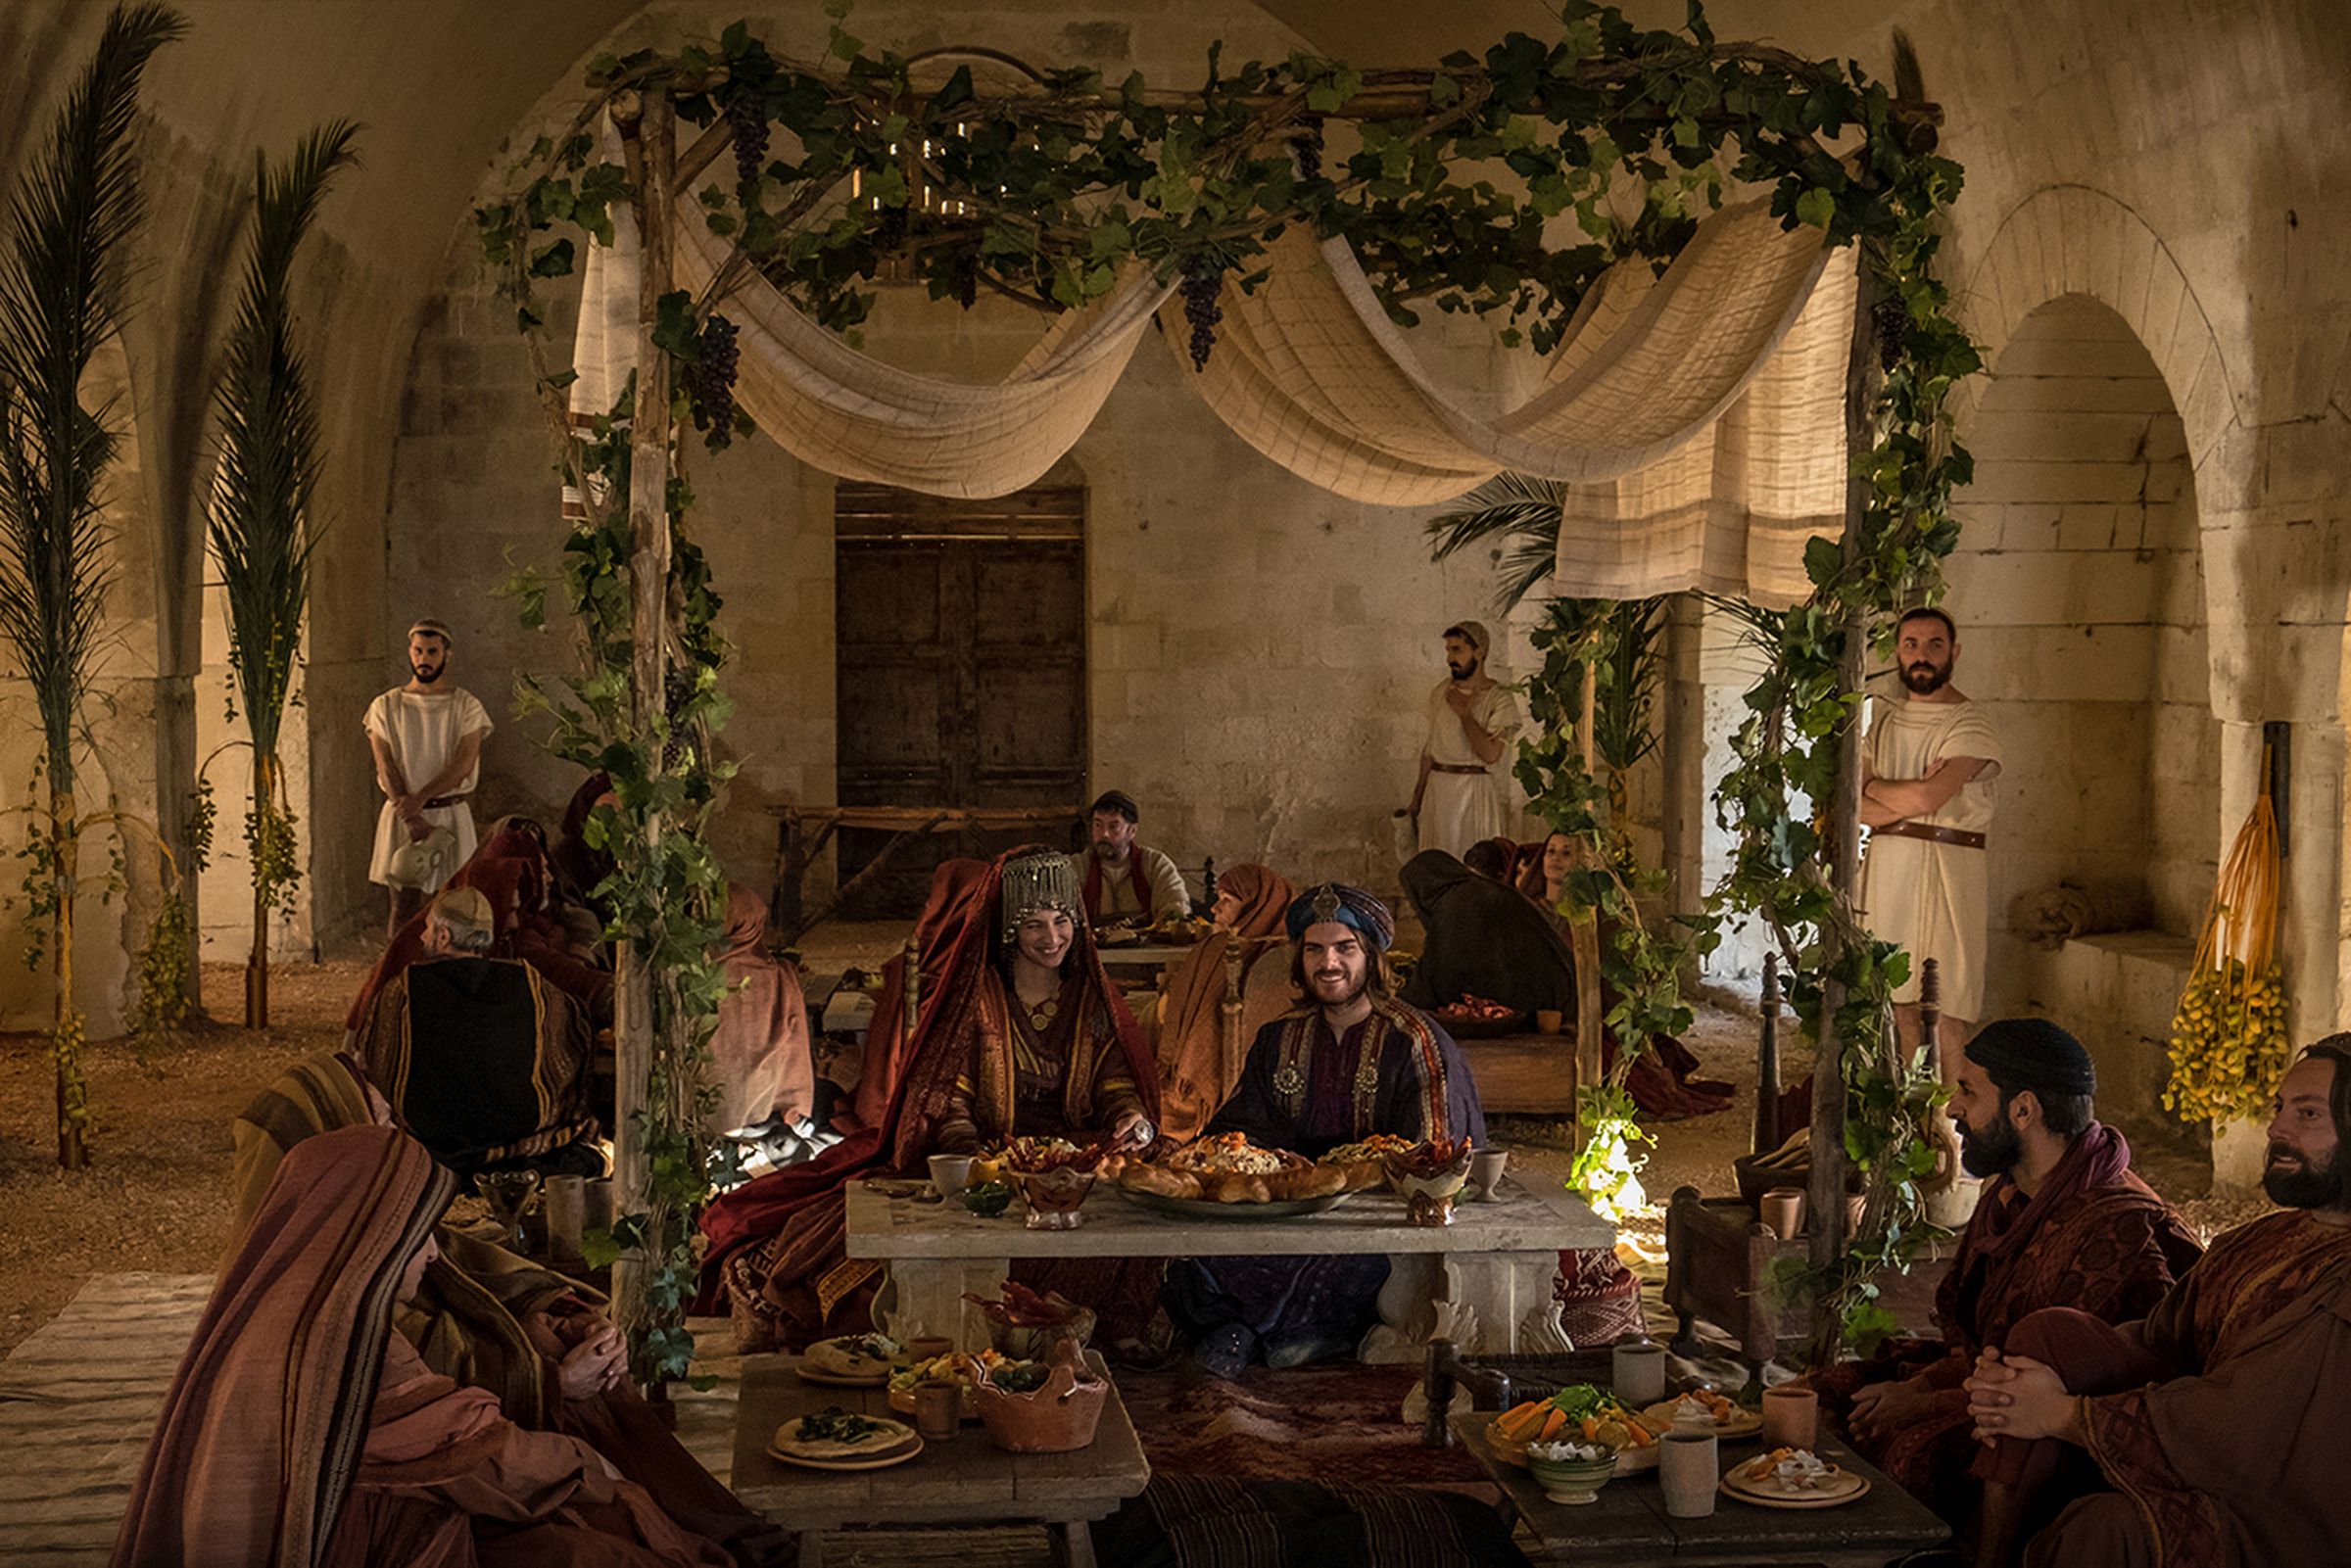 7 Miracles plays its source material completely straight, such as this scene set at the Marriage at Cana. 